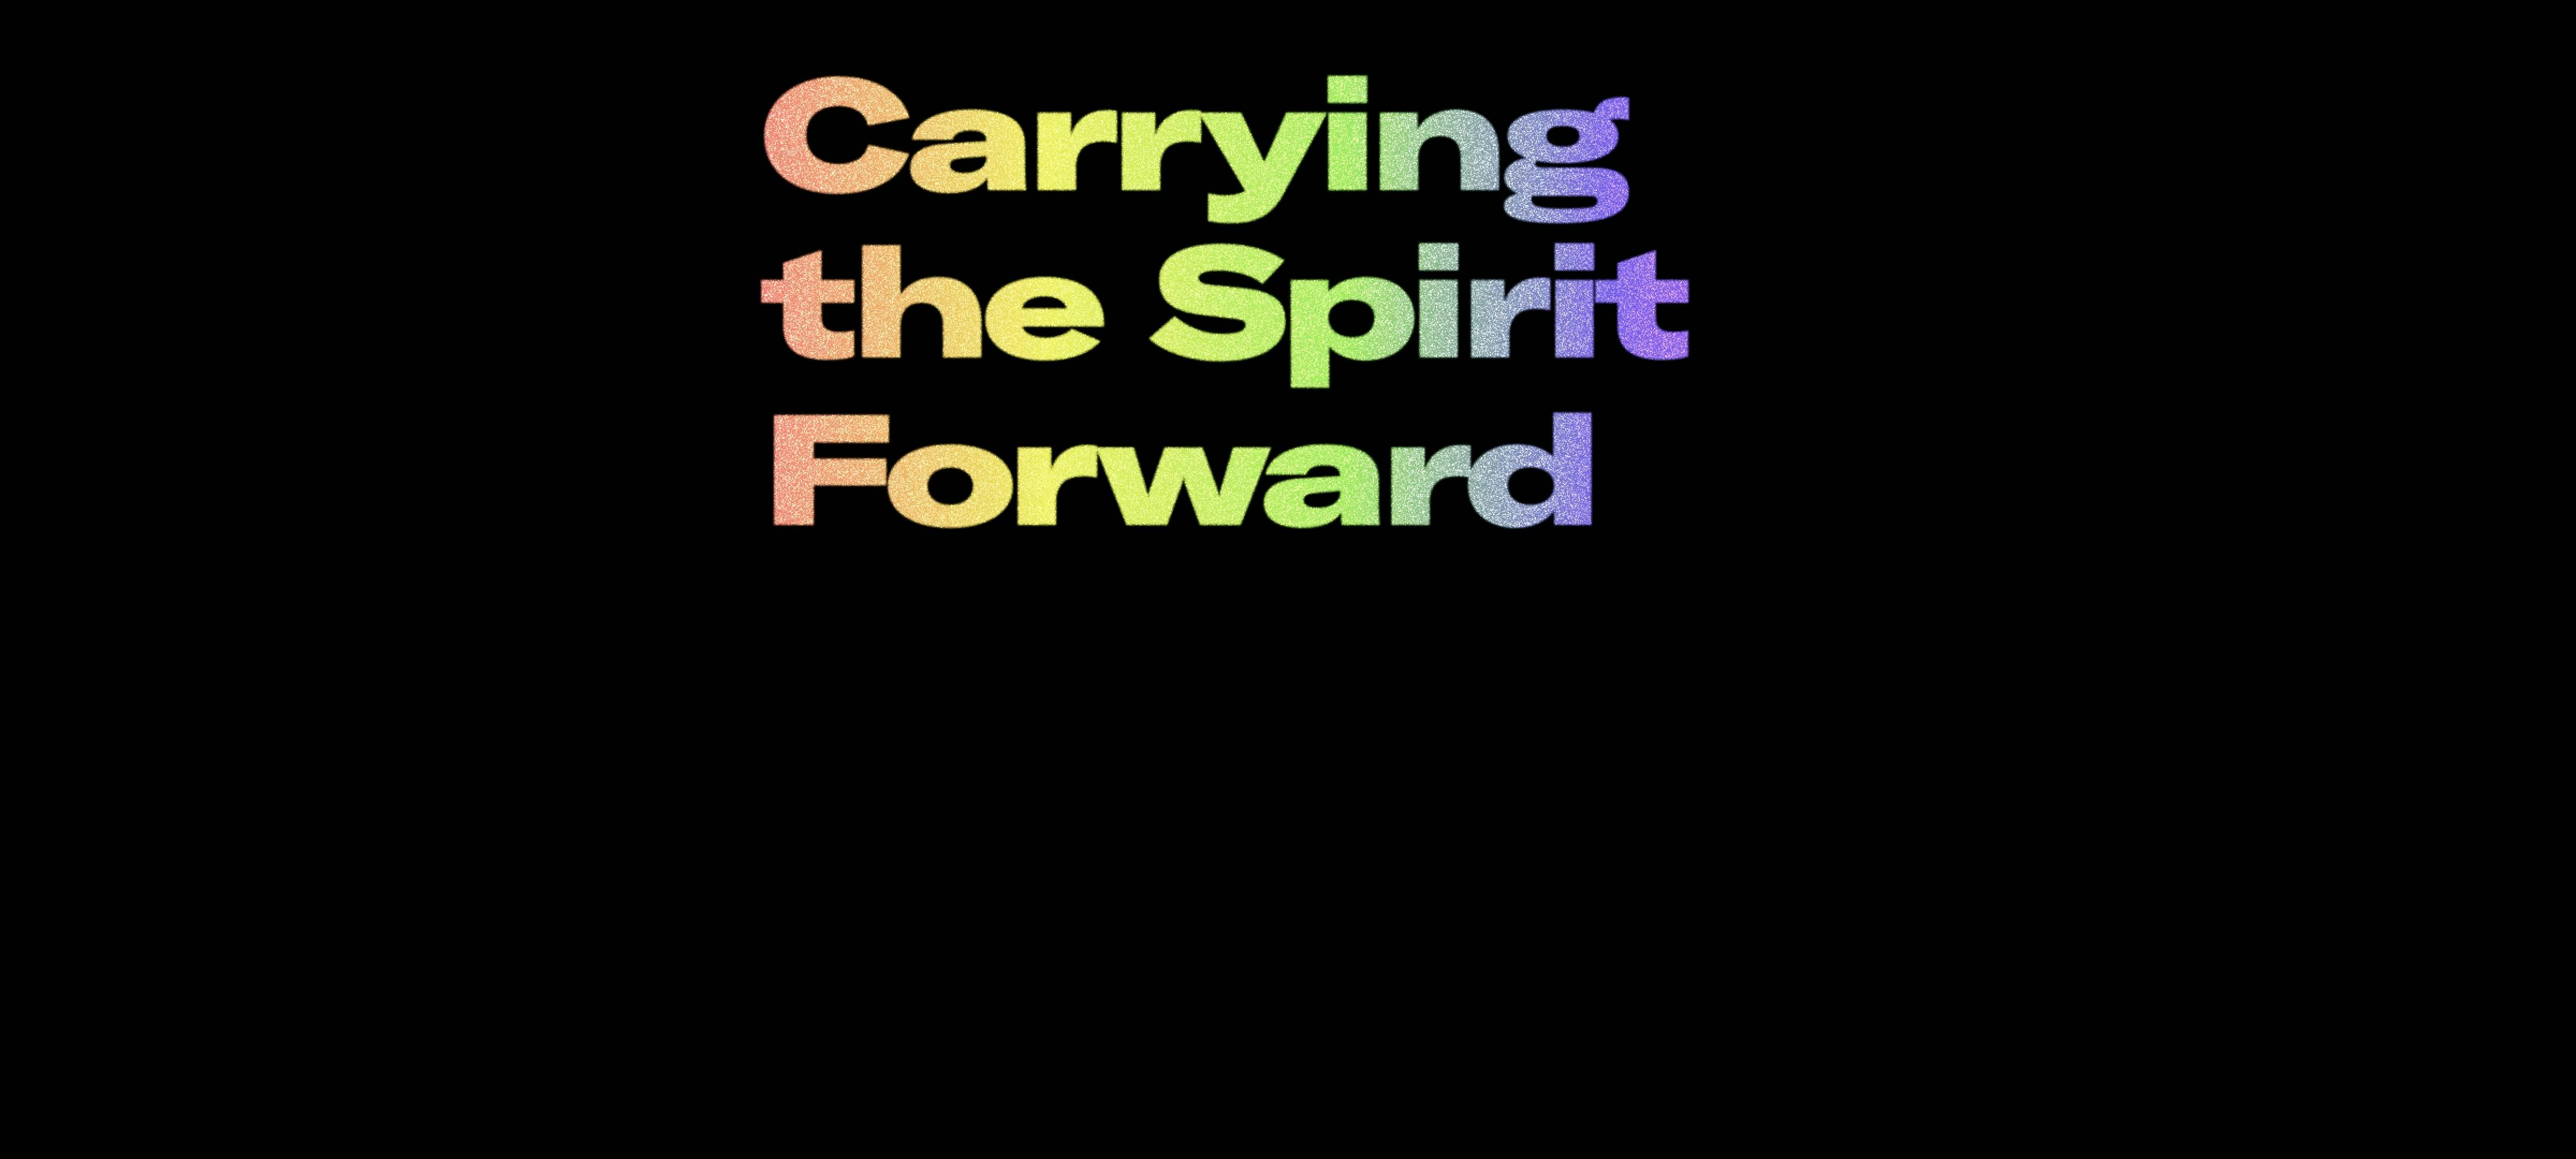 Carrying the Spirit Forward